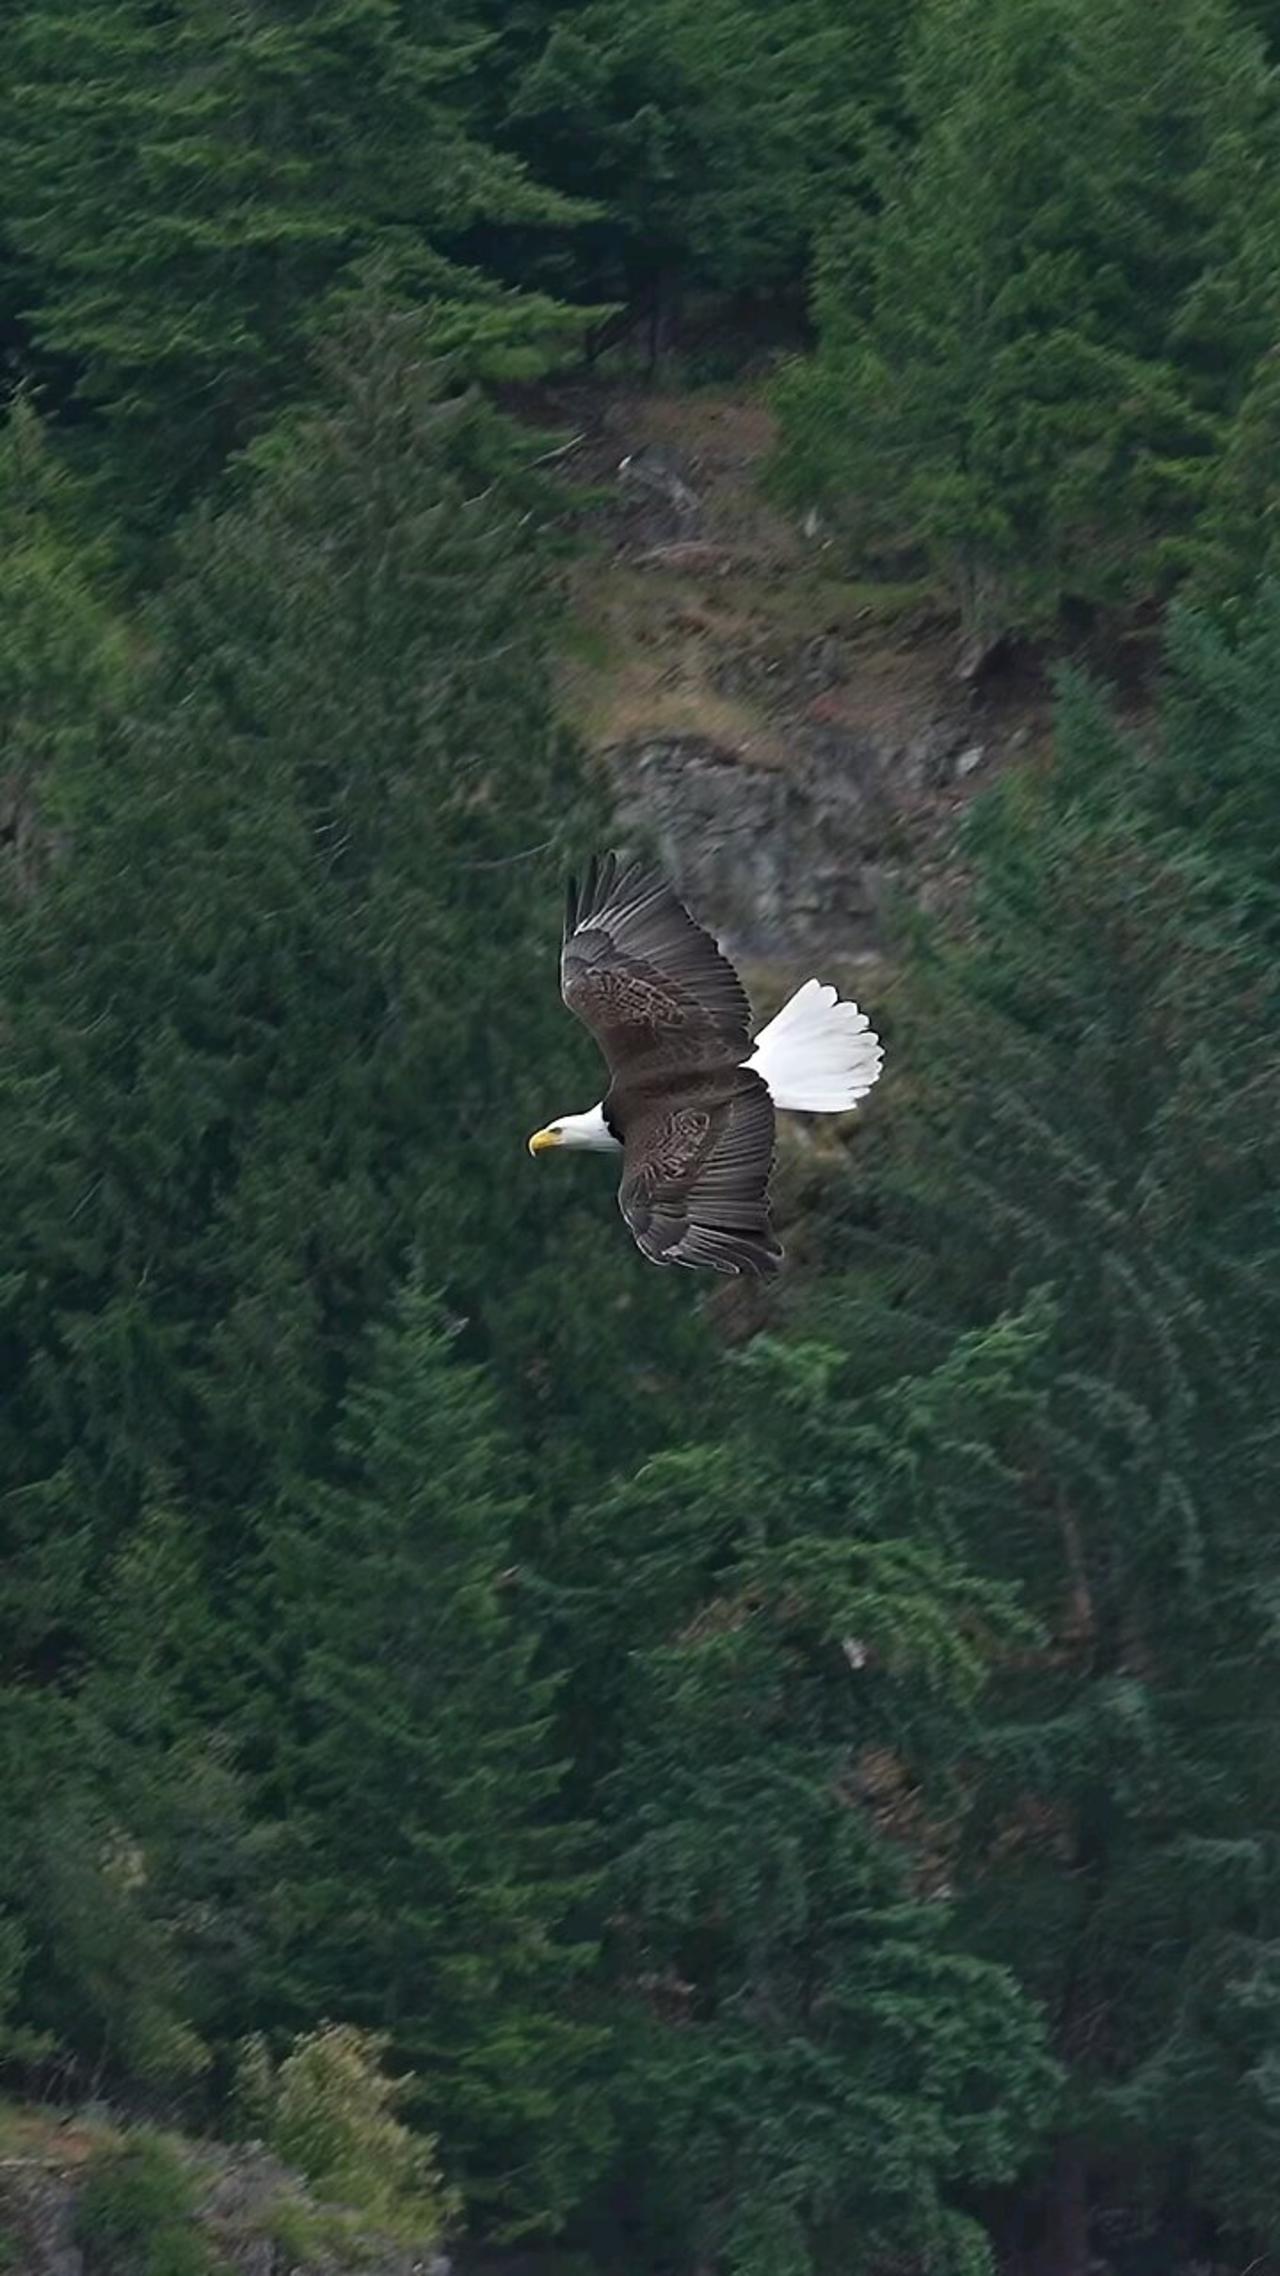 EAGLE catching a fish